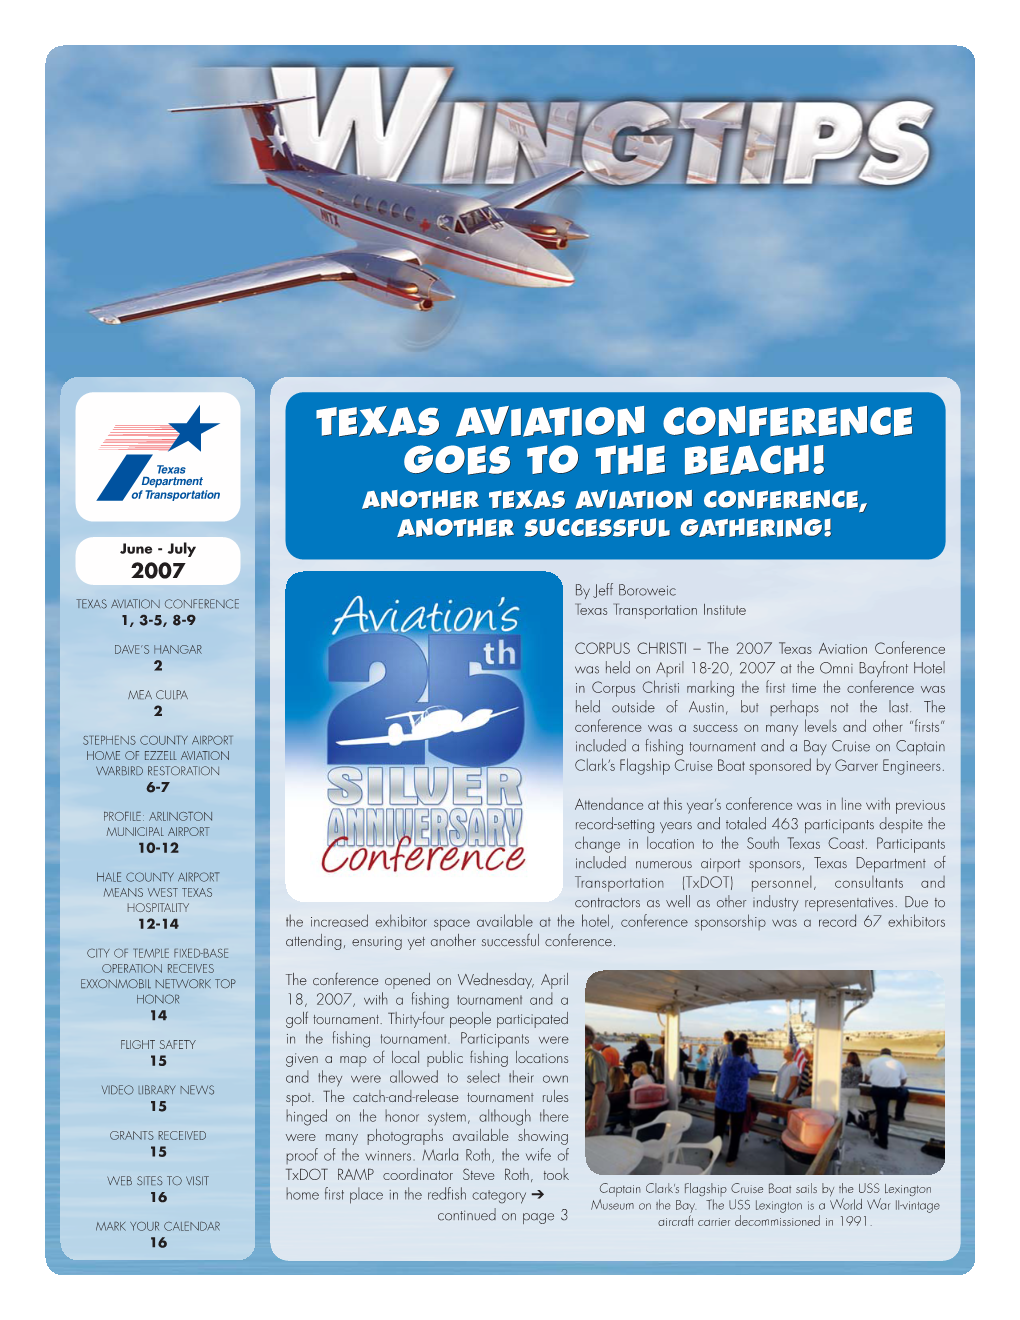 Texas Aviation Conference Goes to the Beach!